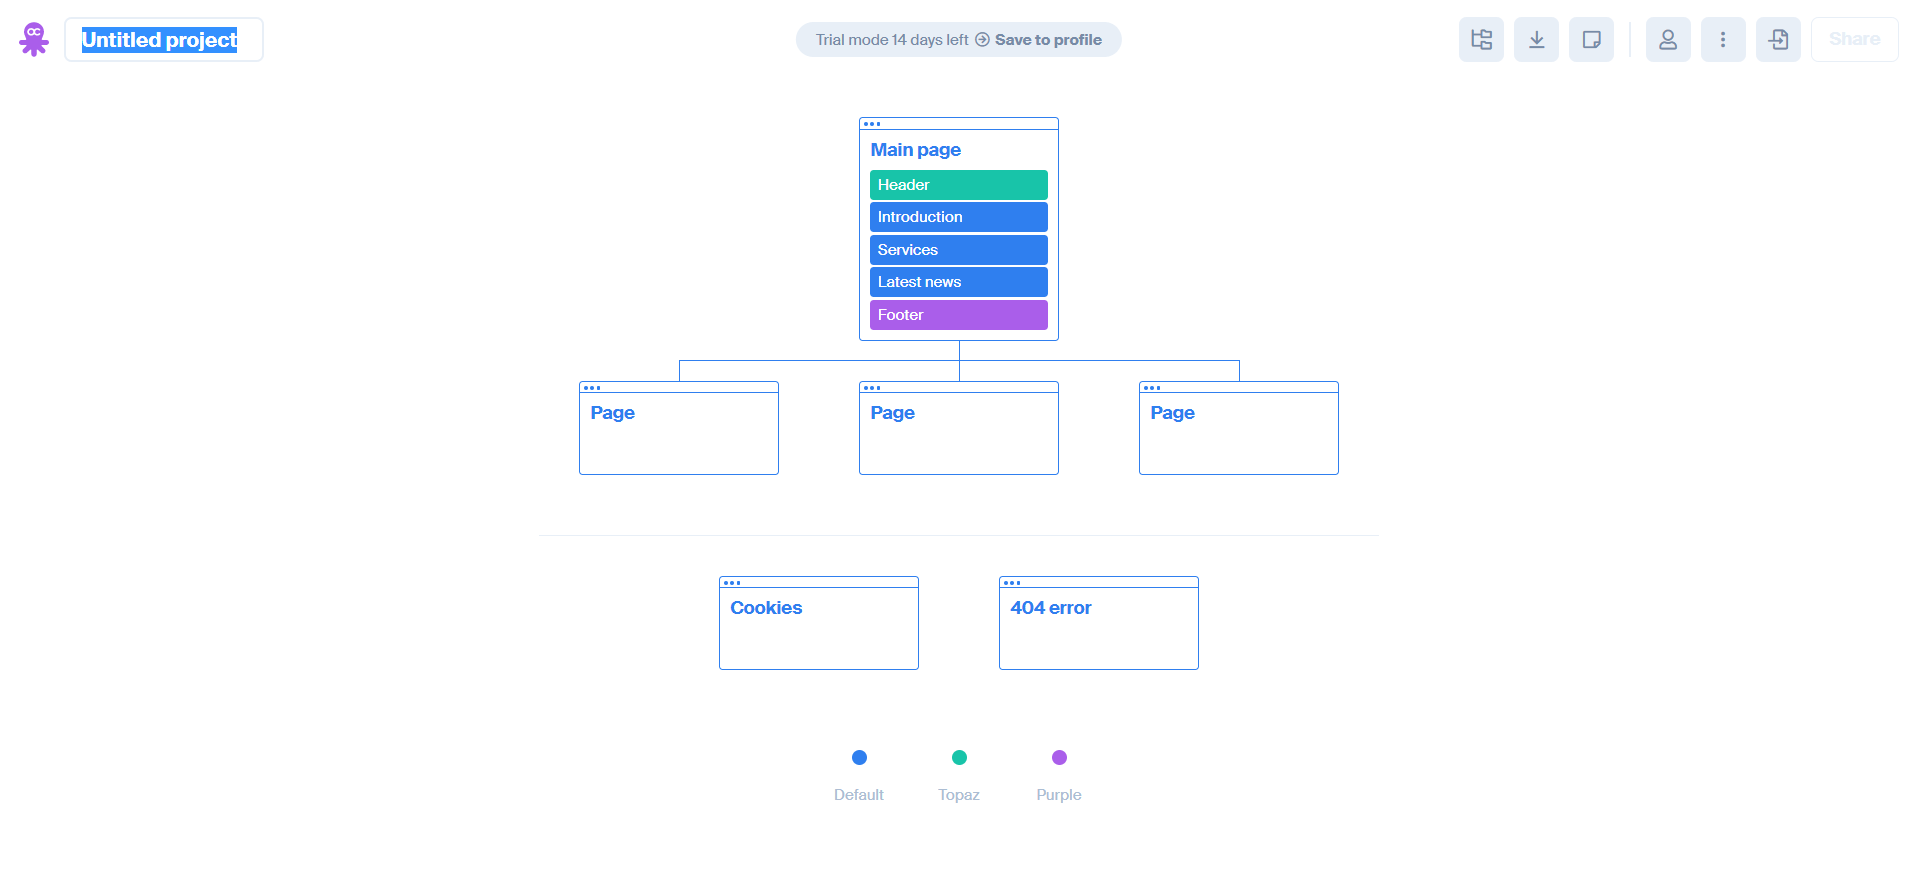 Octopus.do is a minimalist sitemap builder with emphasis on content blocks